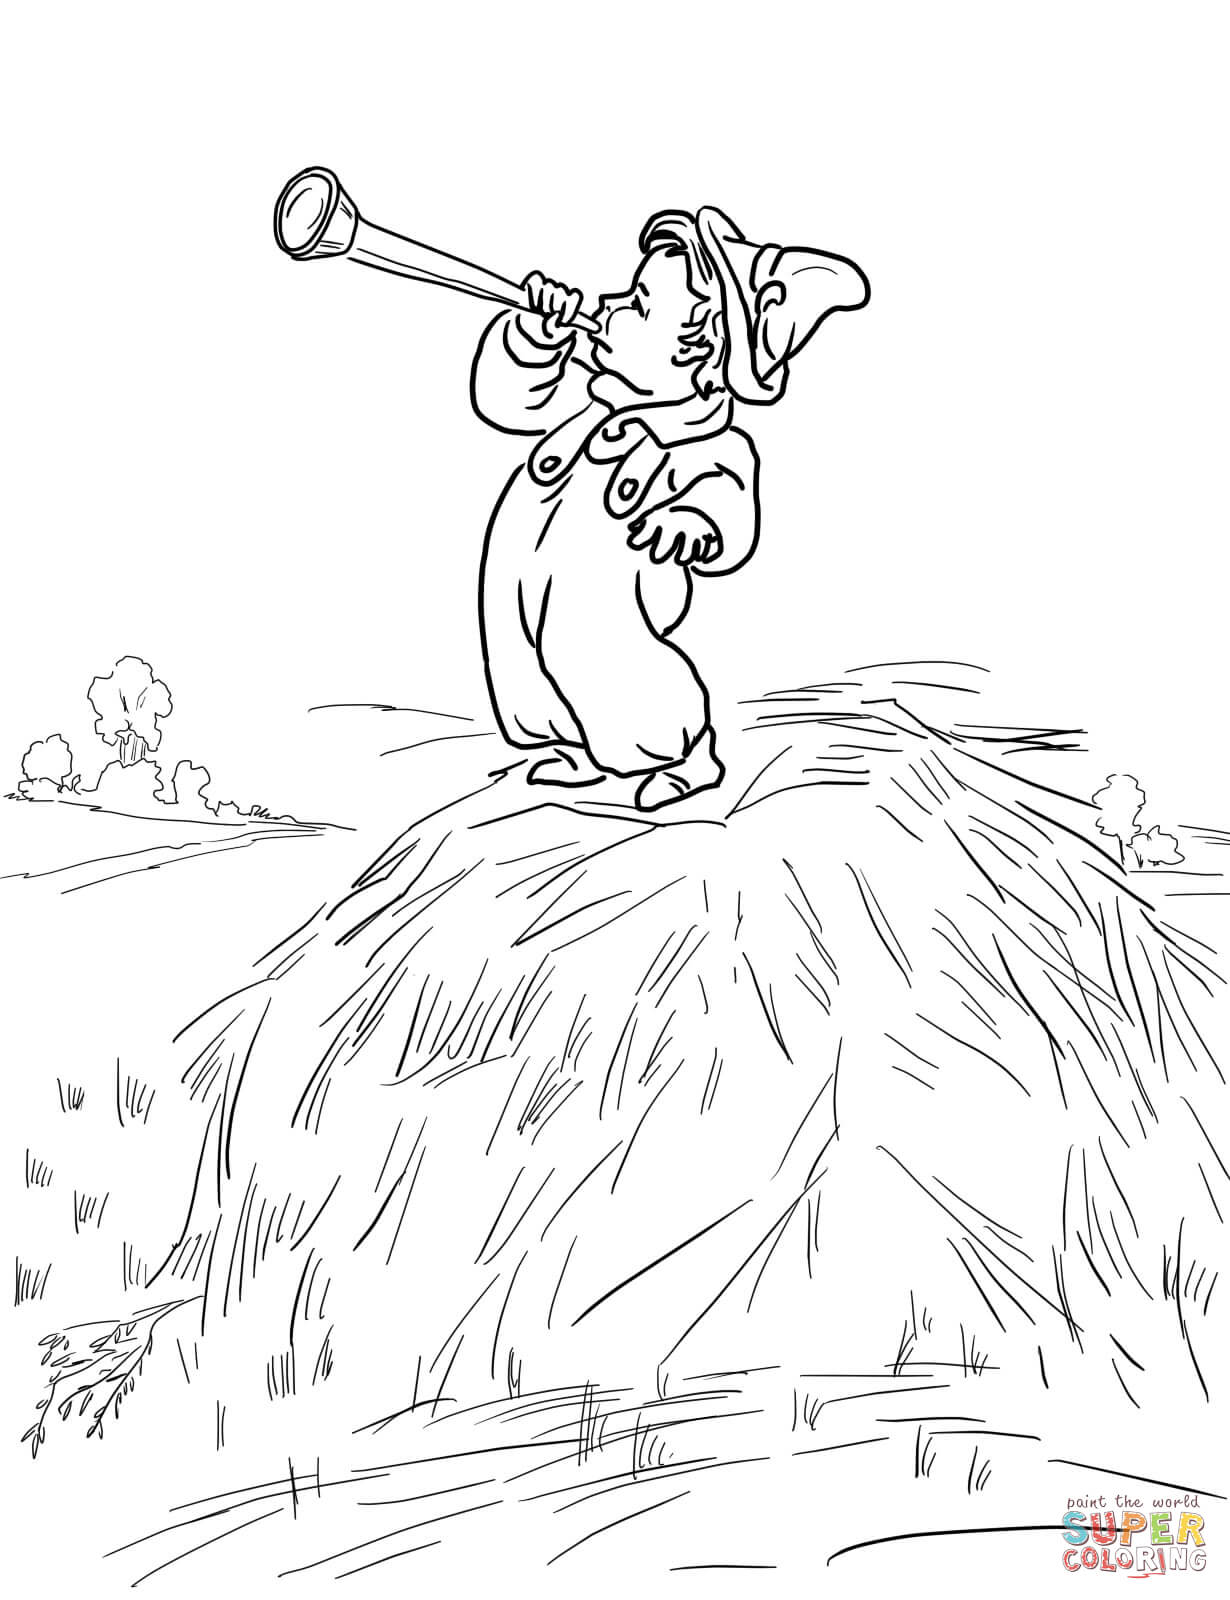 Mother Goose Nursery Rhymes coloring pages | Free Coloring Pages